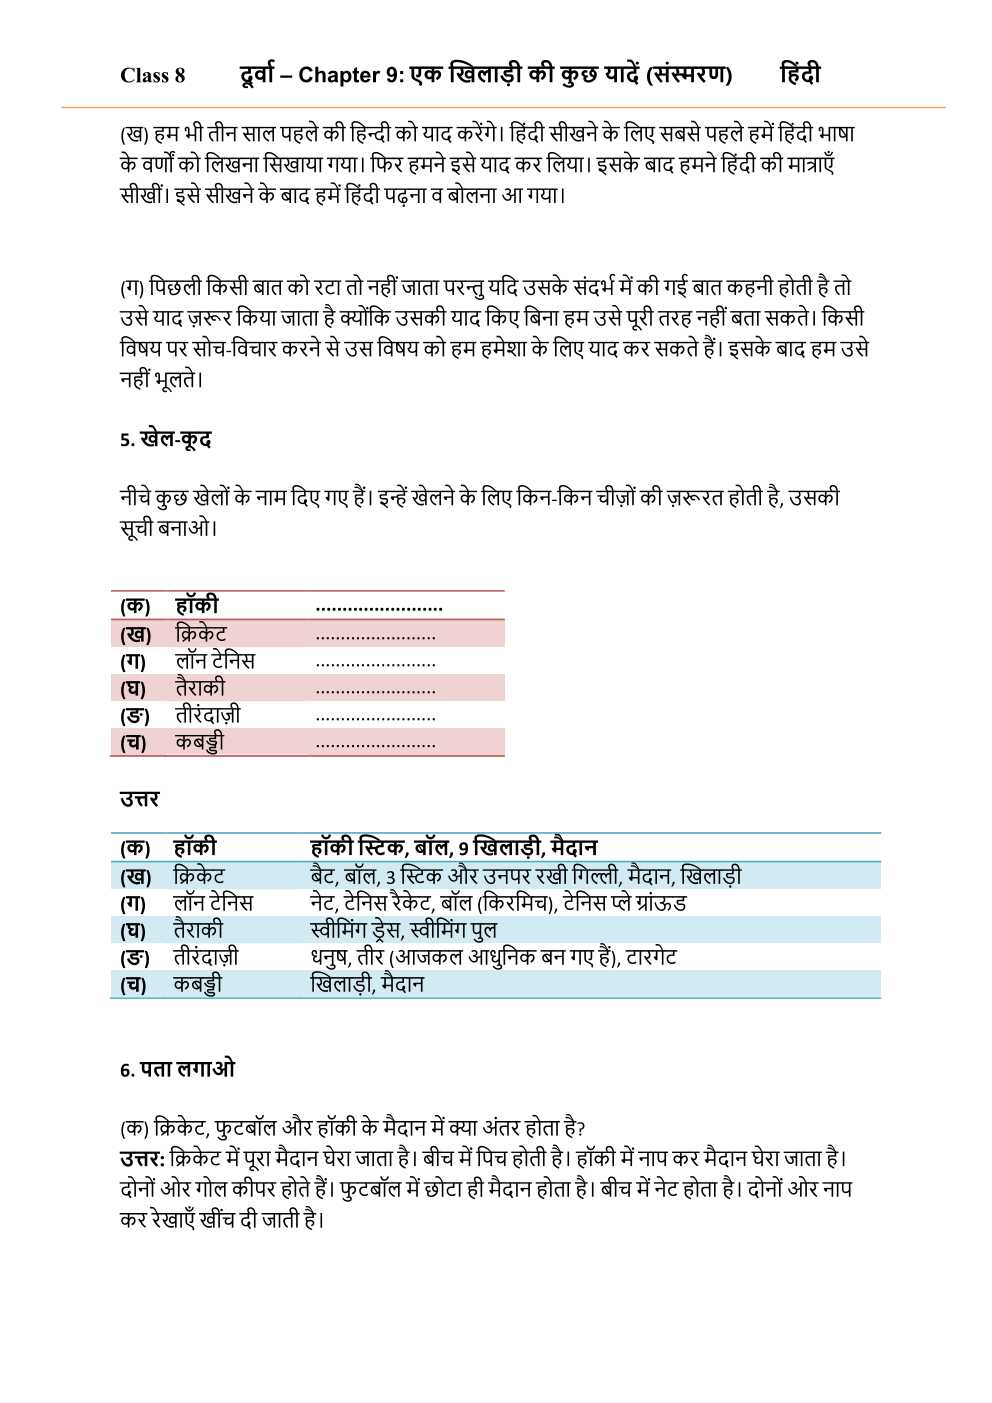 NCERT Solutions For Class 8 Hindi Durva Chapter 9